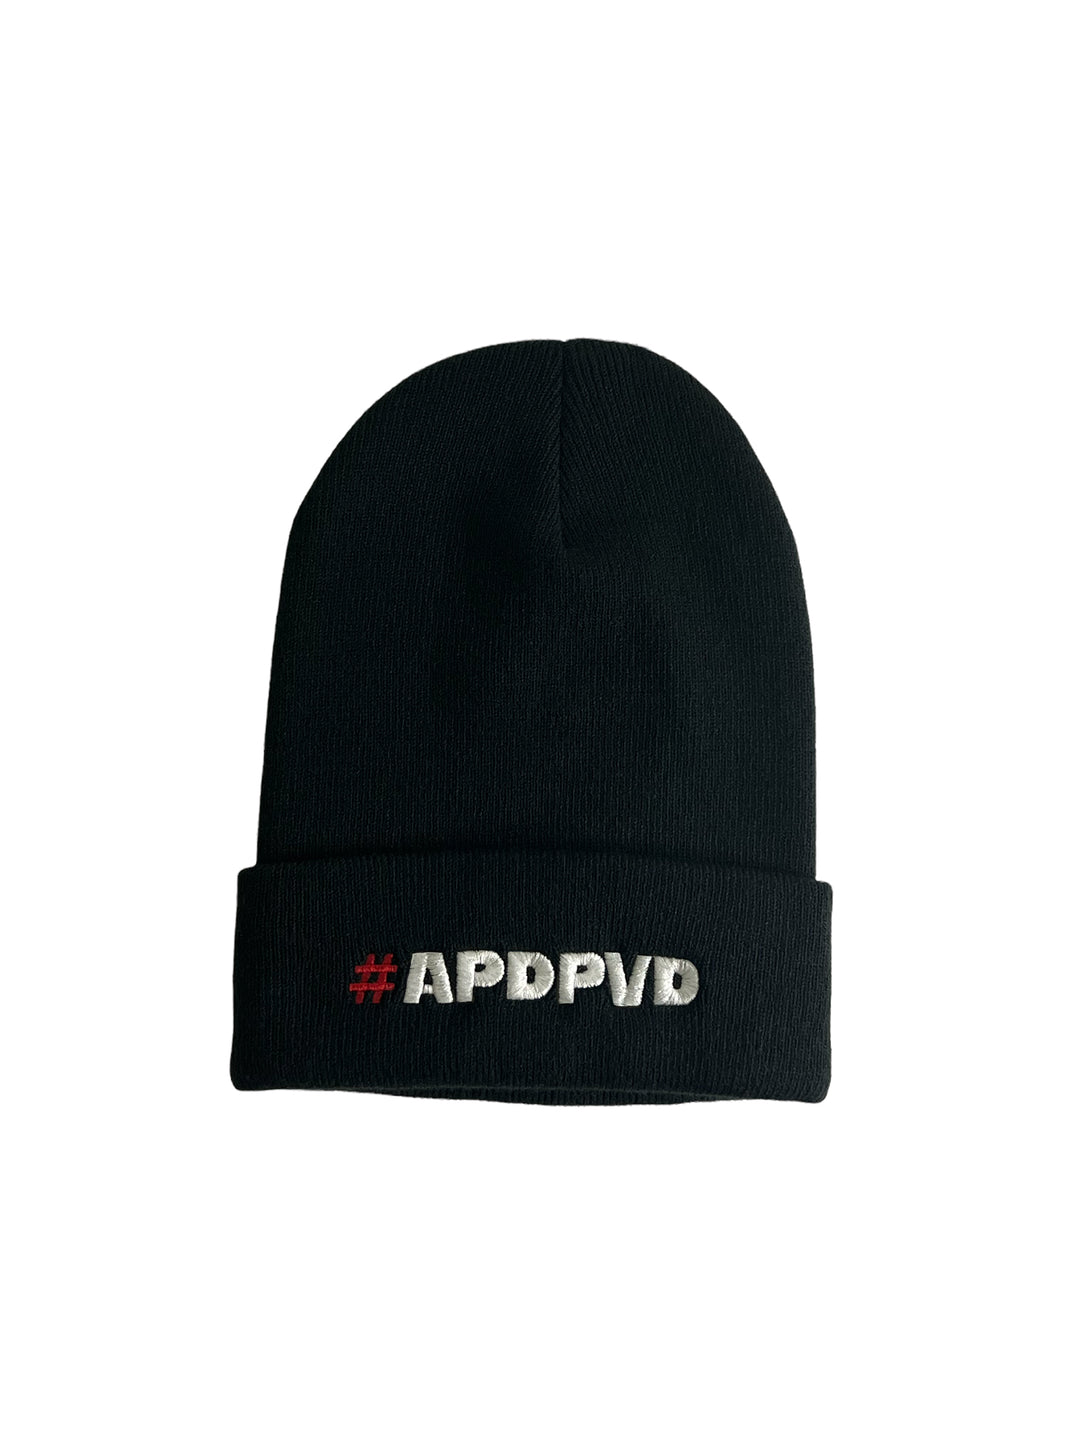 black beanie with red hashtag and white embroidery that reads #APDPVD